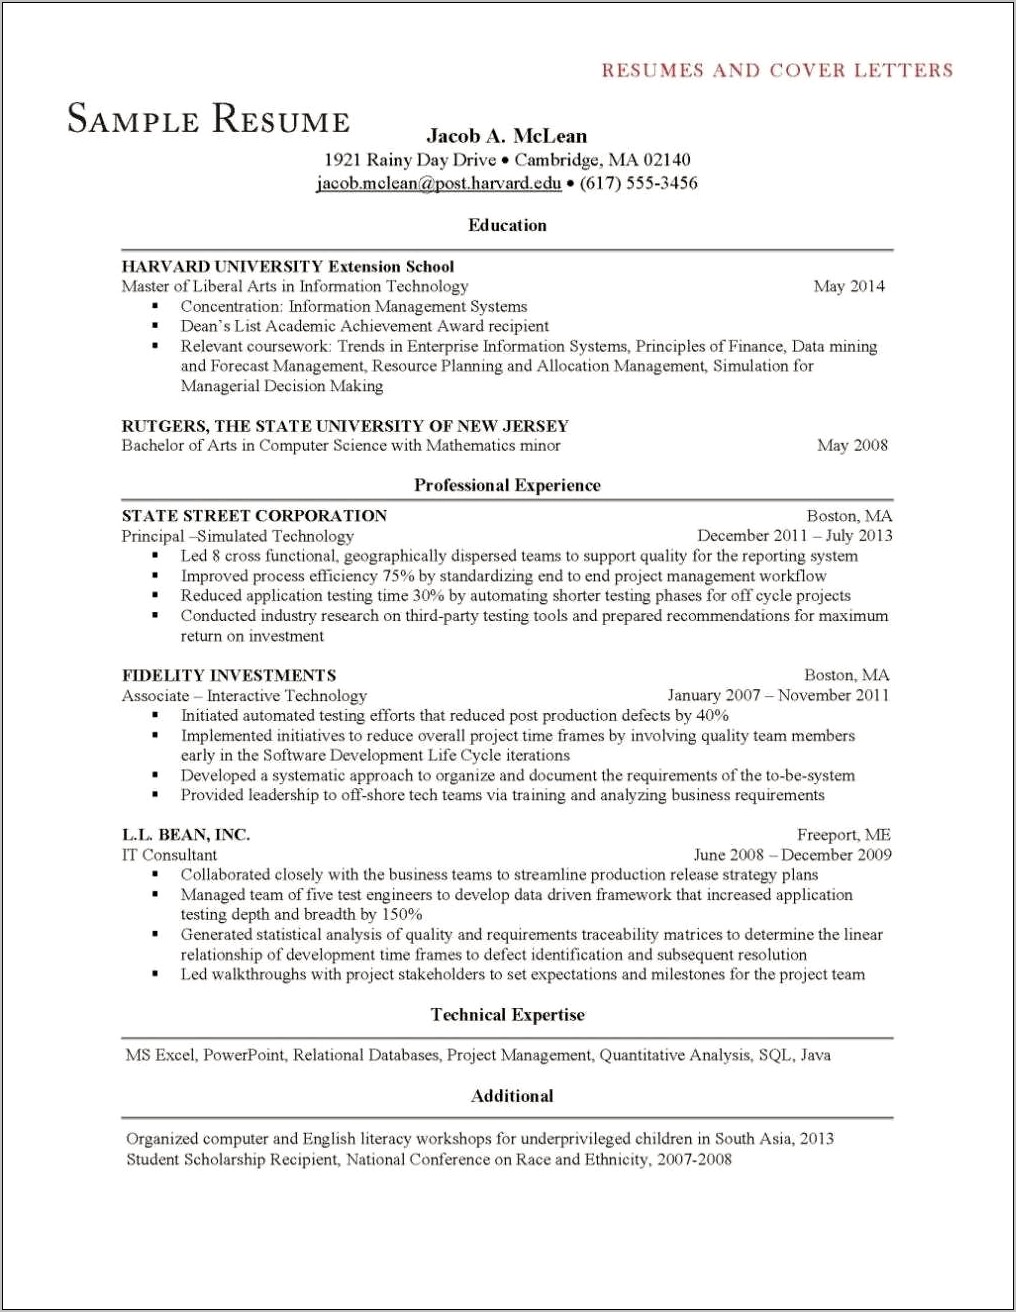 Harvard Office Of Career Services Resume Template